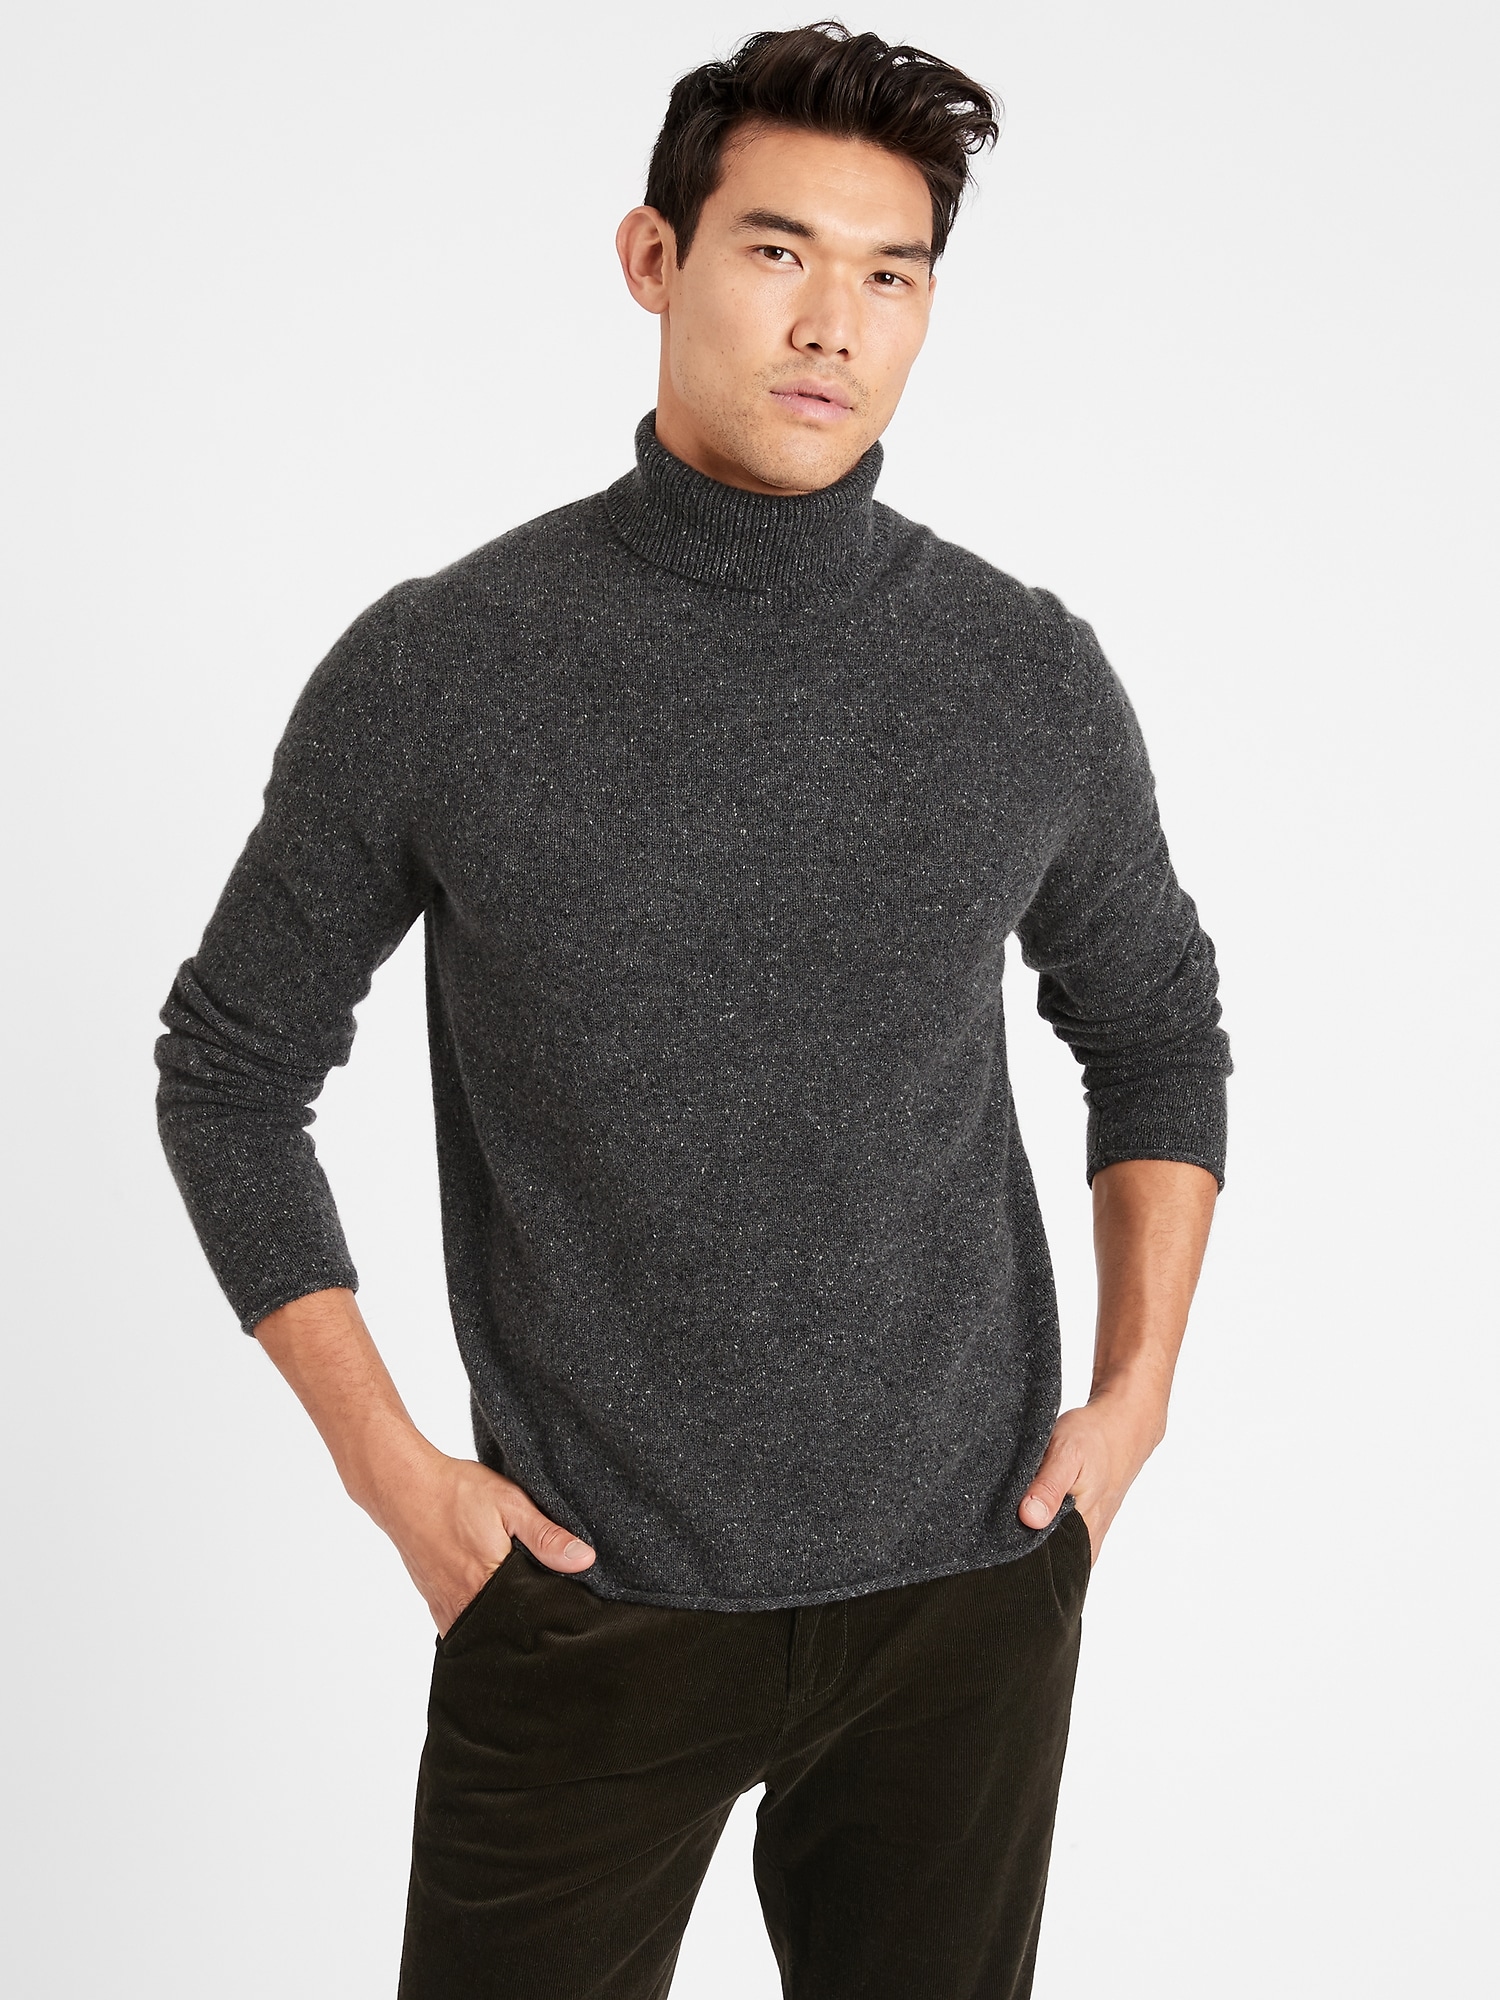 Heritage Recycled Cashmere Turtleneck Sweater